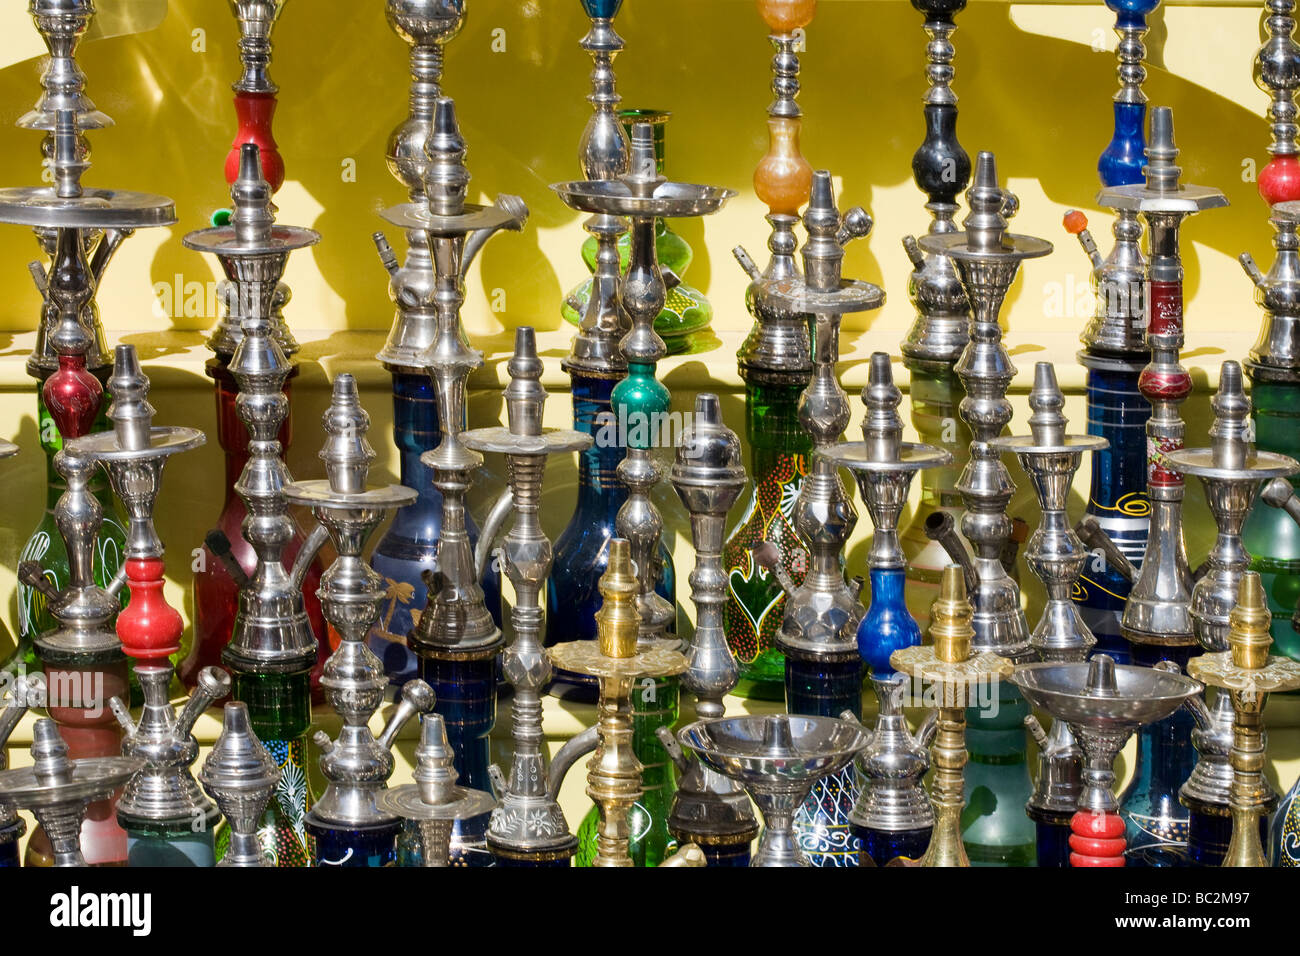 Sheesha pipes for sale in souk, Southern Egypt, North Africa Stock Photo